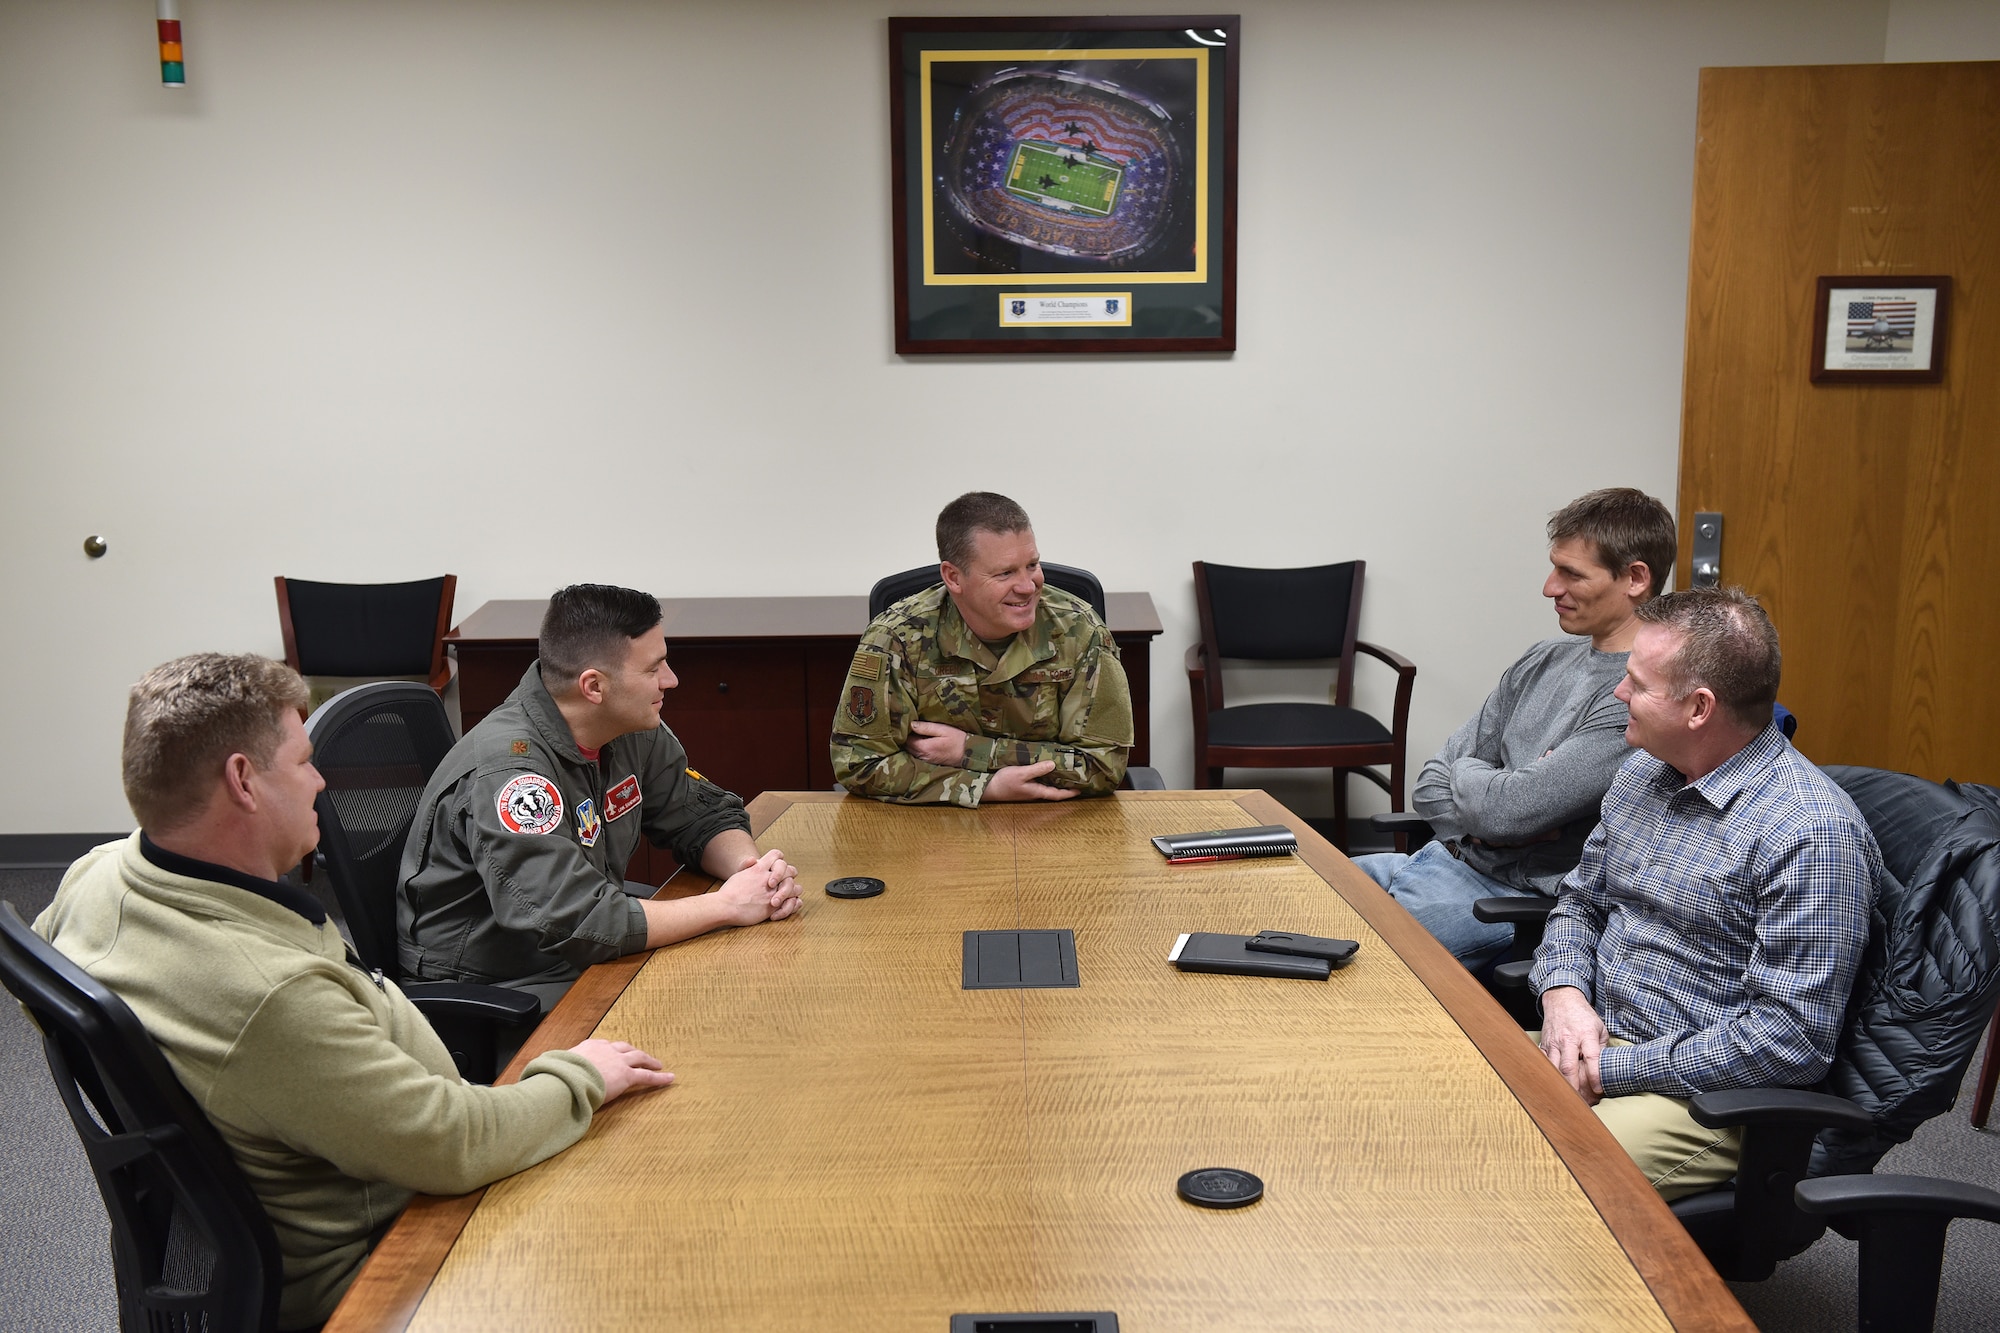 115th Fighter Wing Vice Commander Col. Christopher Green, center, joins members of the wing's safety team during a meeting with safety specialists from Midwest energy company Alliant Energy at Truax Field, Wisconsin, Mar. 7, 2019.